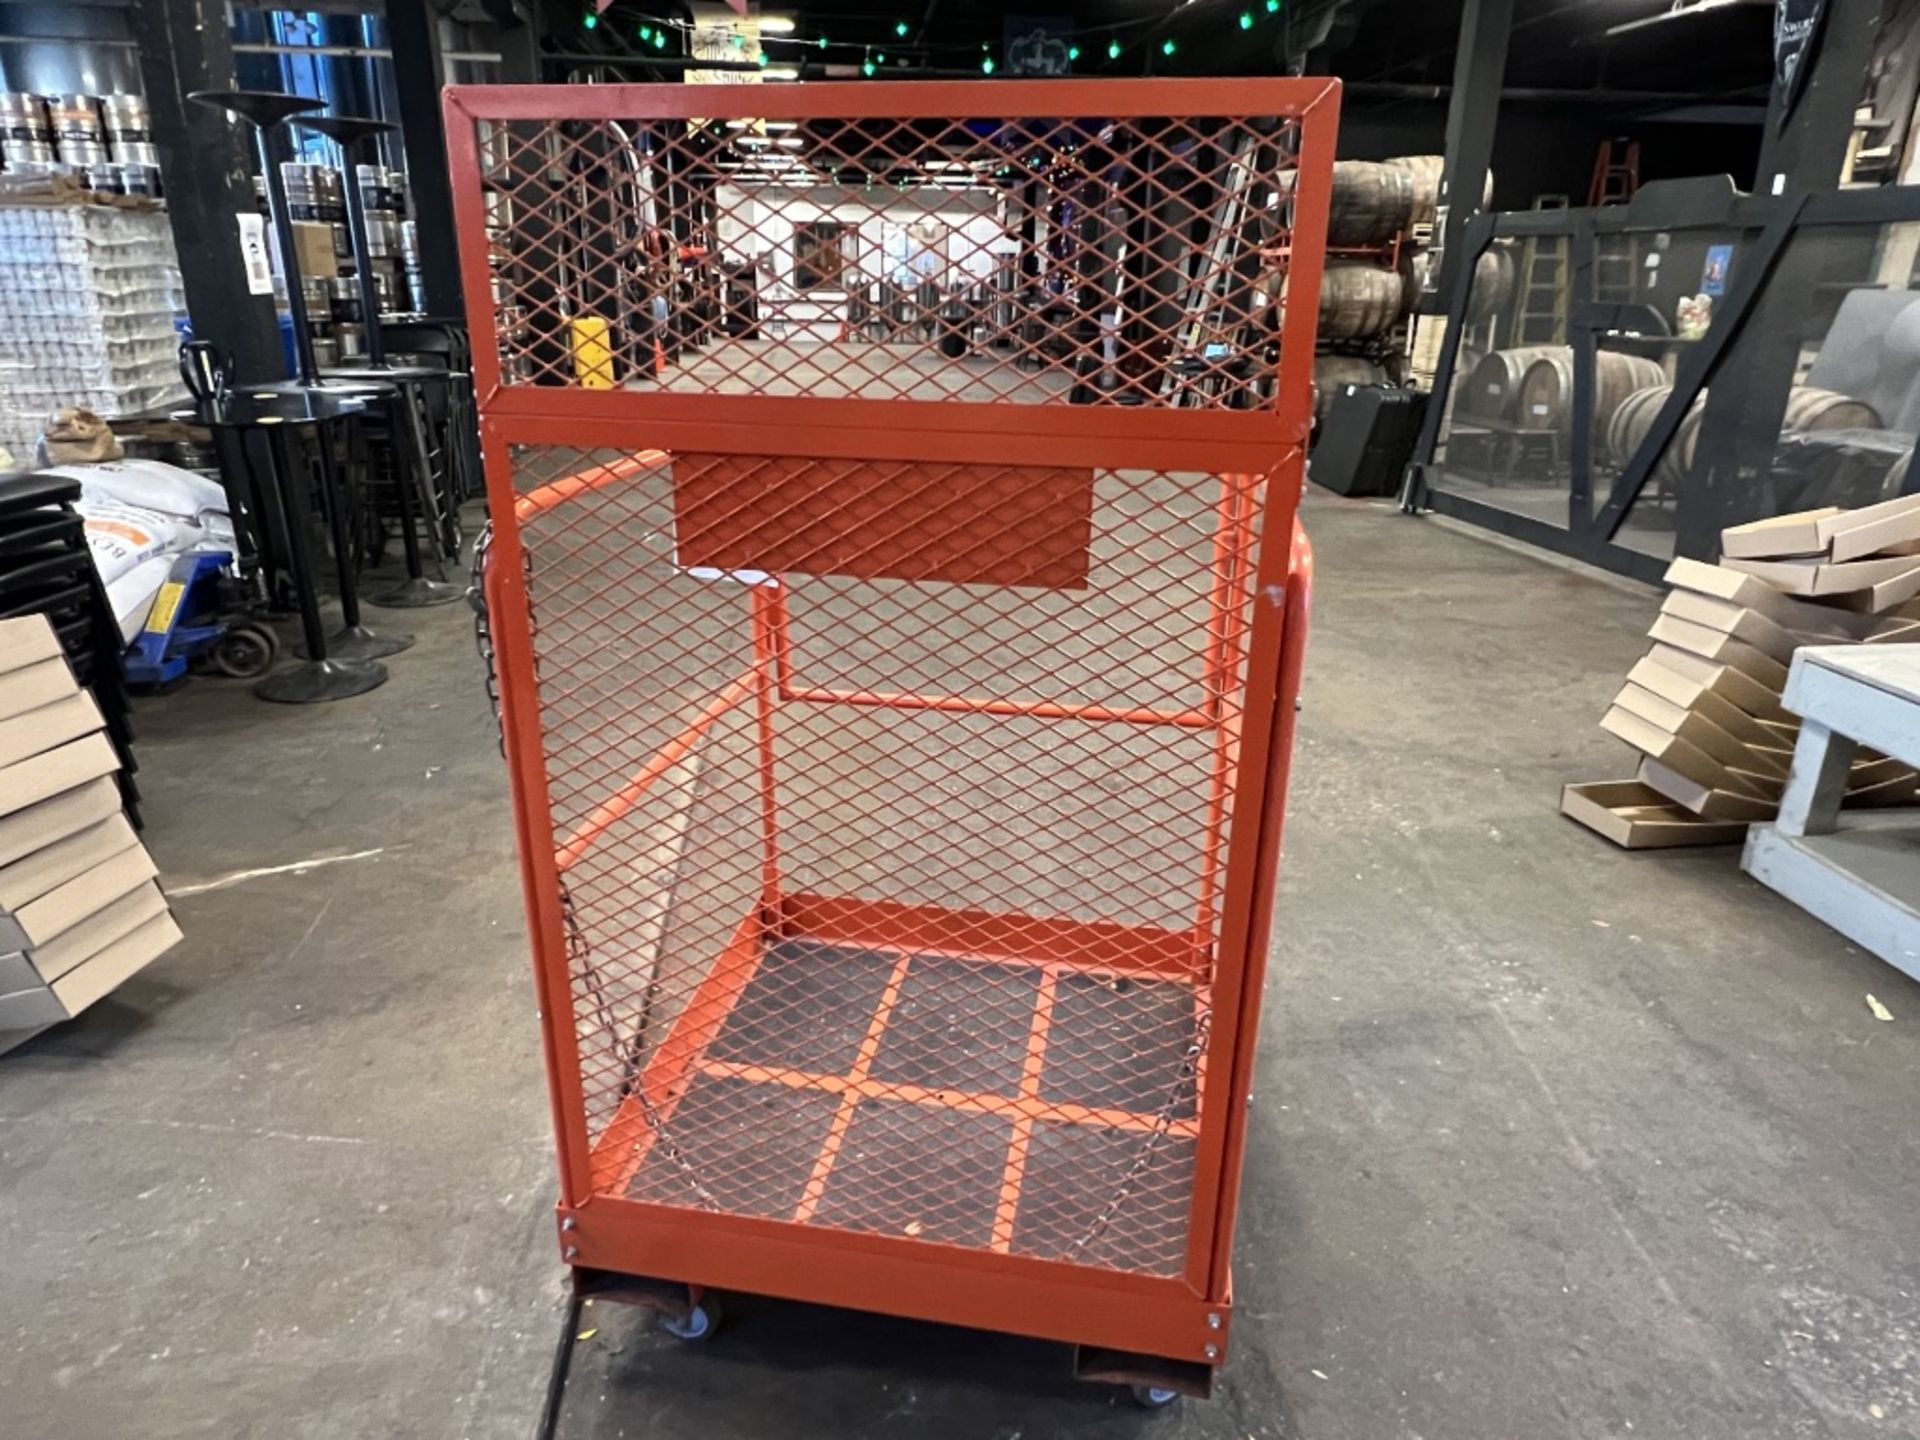 LIFT CAGE ATTACHMENT FOR FORKLIFT, MAXIMUM CAPACITY 1000 LBS - Image 6 of 8